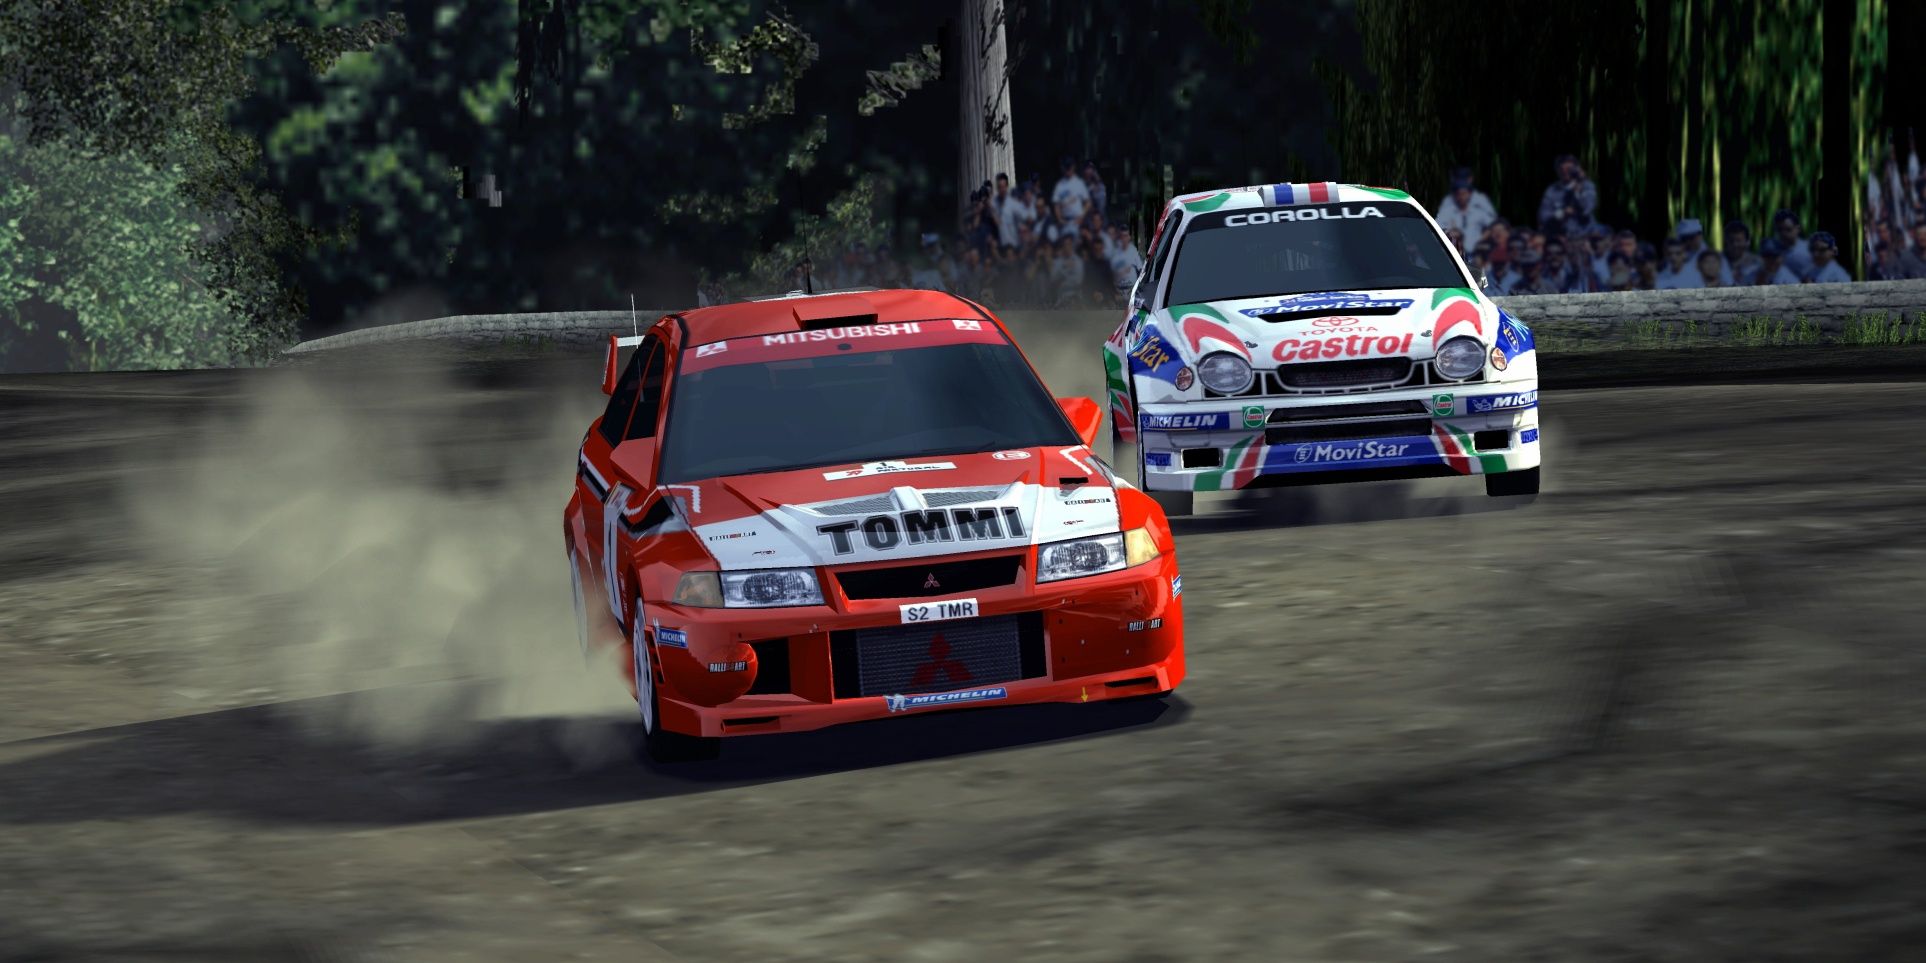 Two cars racing alongside each other with the words "Tommi" written on the red car and "Castrol" on the white car in Gran Turismo 3: A-Spec